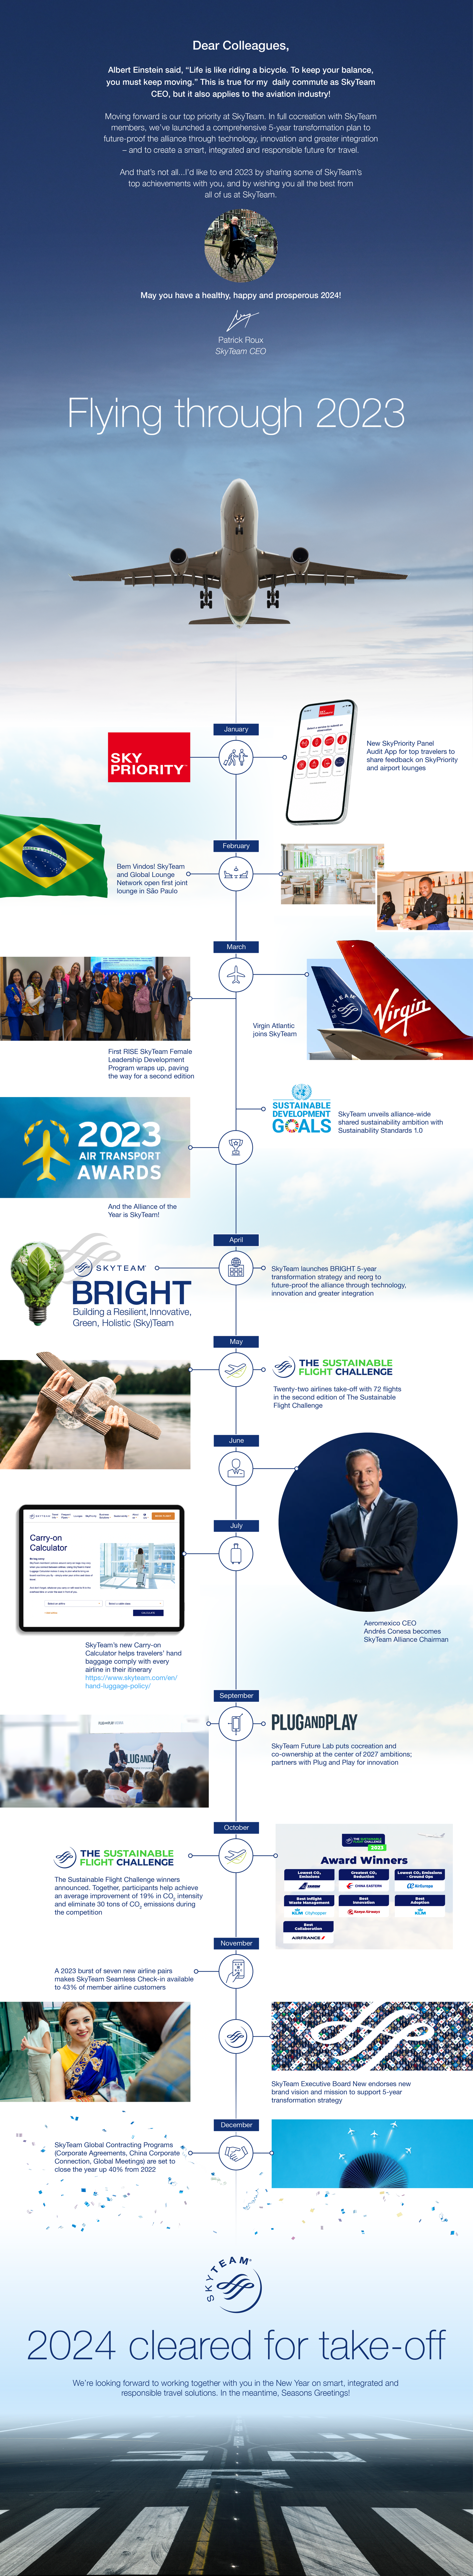 Flying through 2023 Infographic